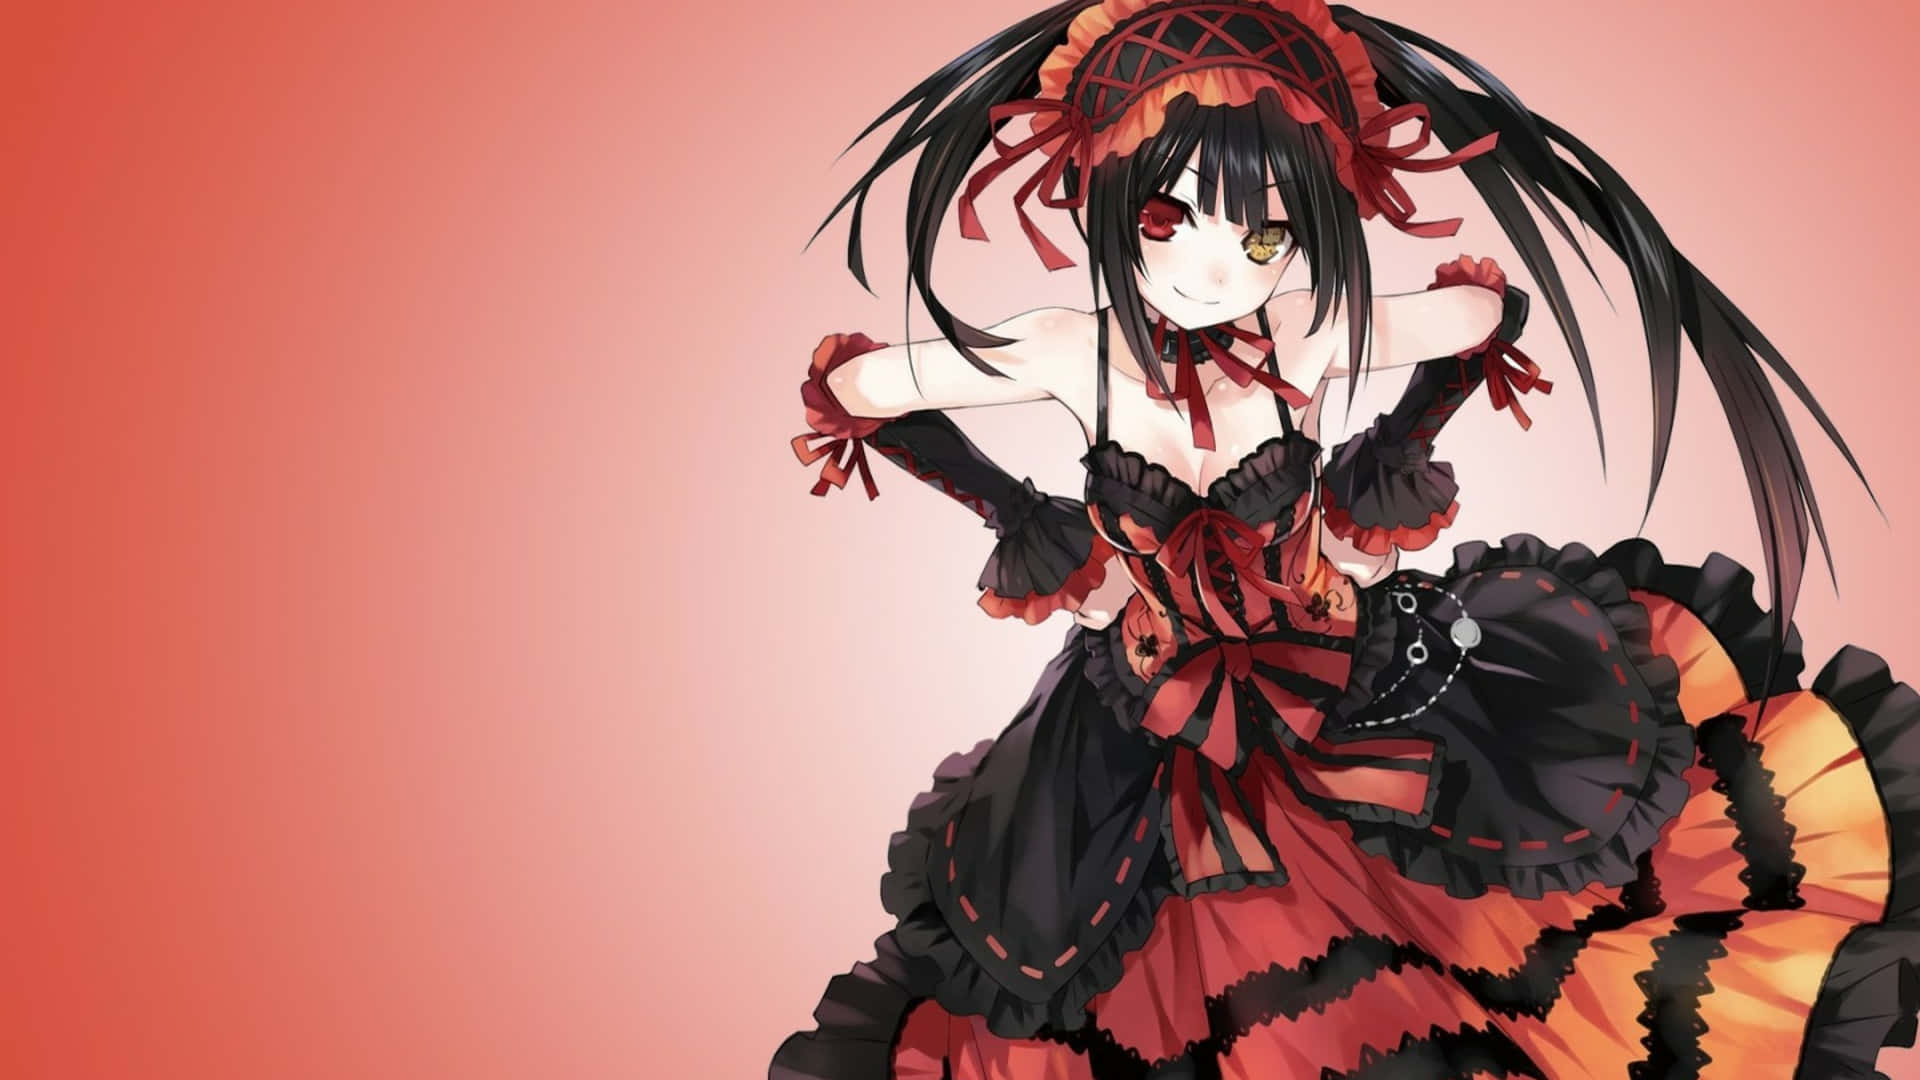 A Girl In A Red Dress With Black Hair Wallpaper